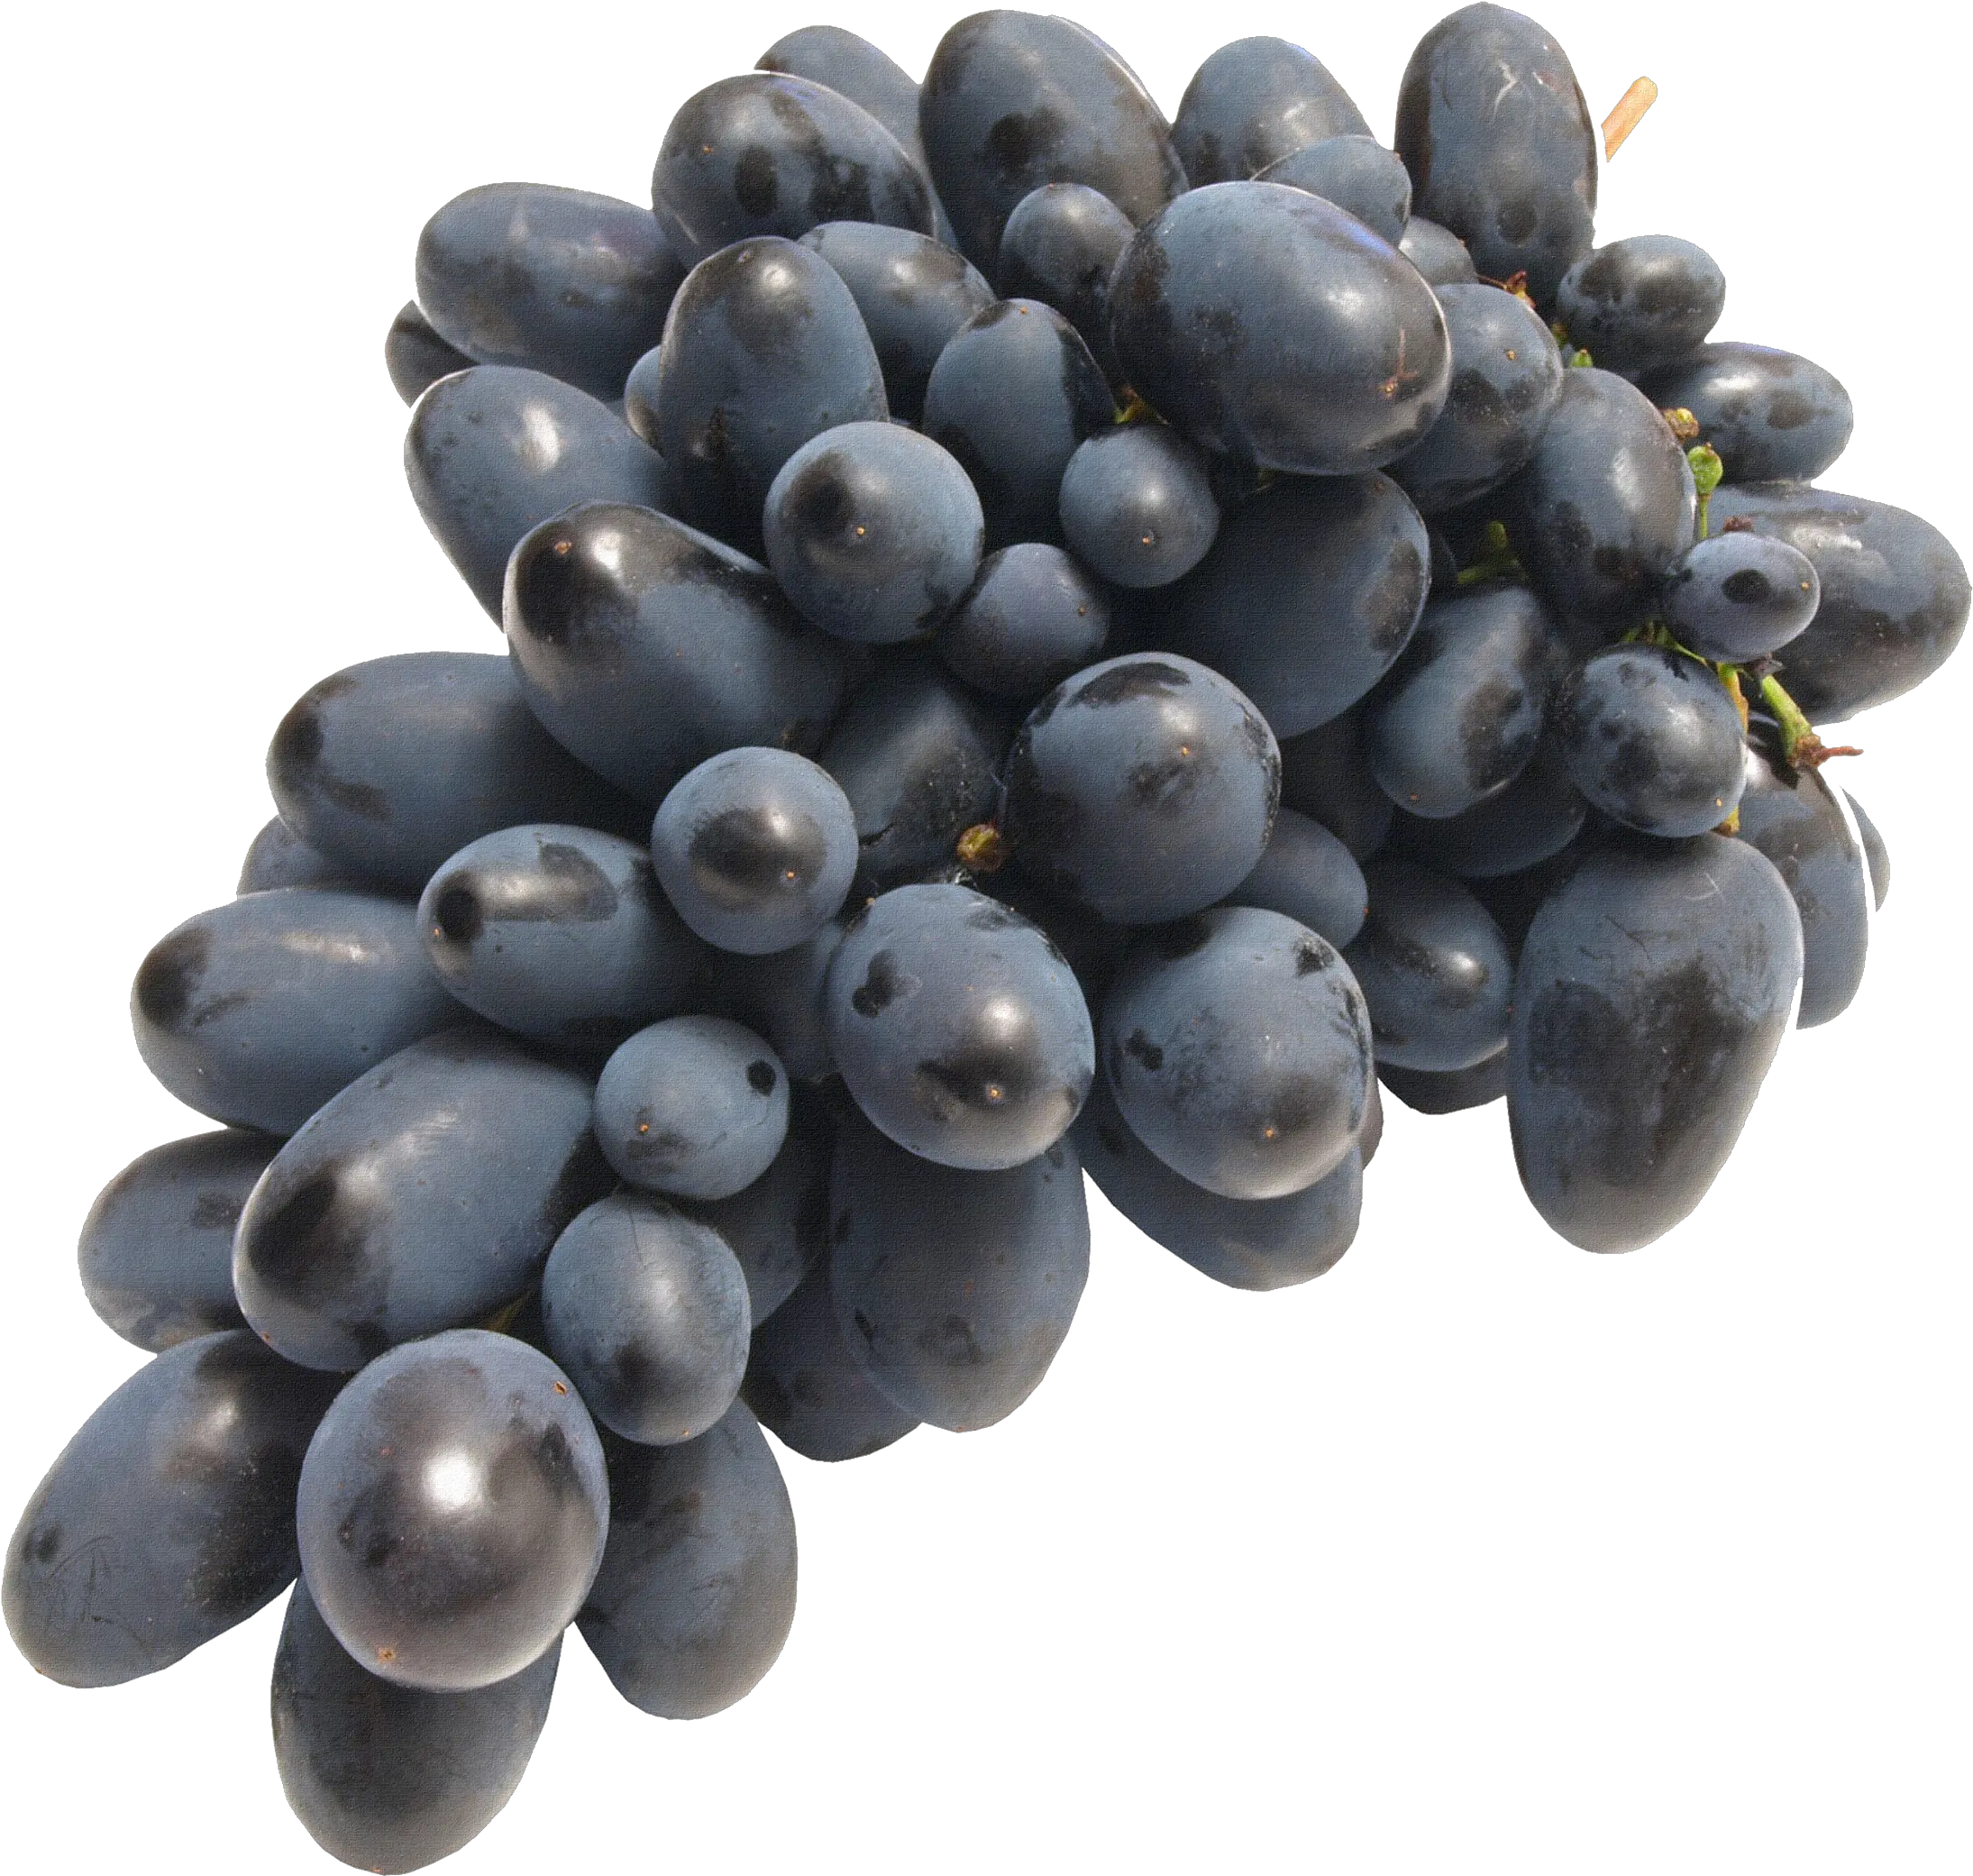 Download Black Grapes Png Image For Free Grape